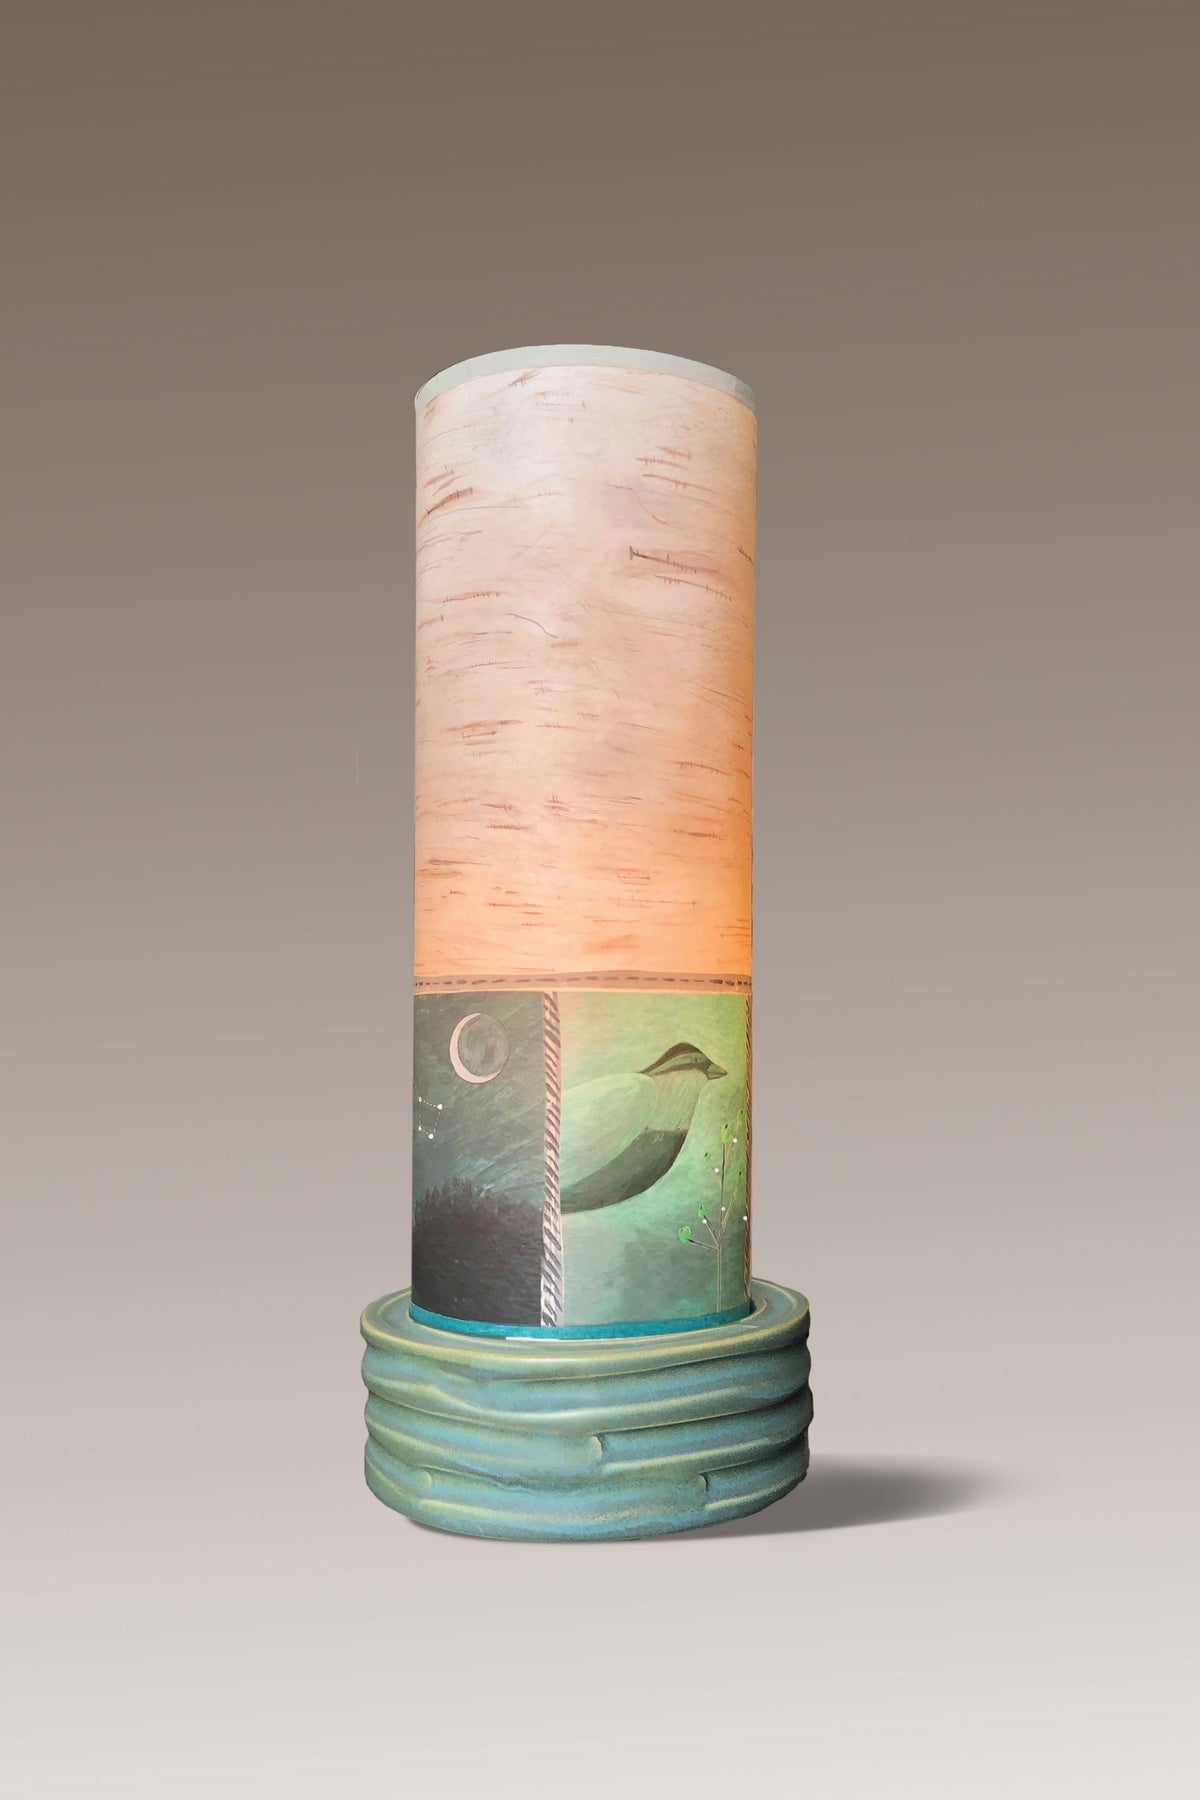 Janna Ugone &amp; Co Luminaires Ceramic Luminaire Accent Lamp with Woodland Trails in Birch Shade